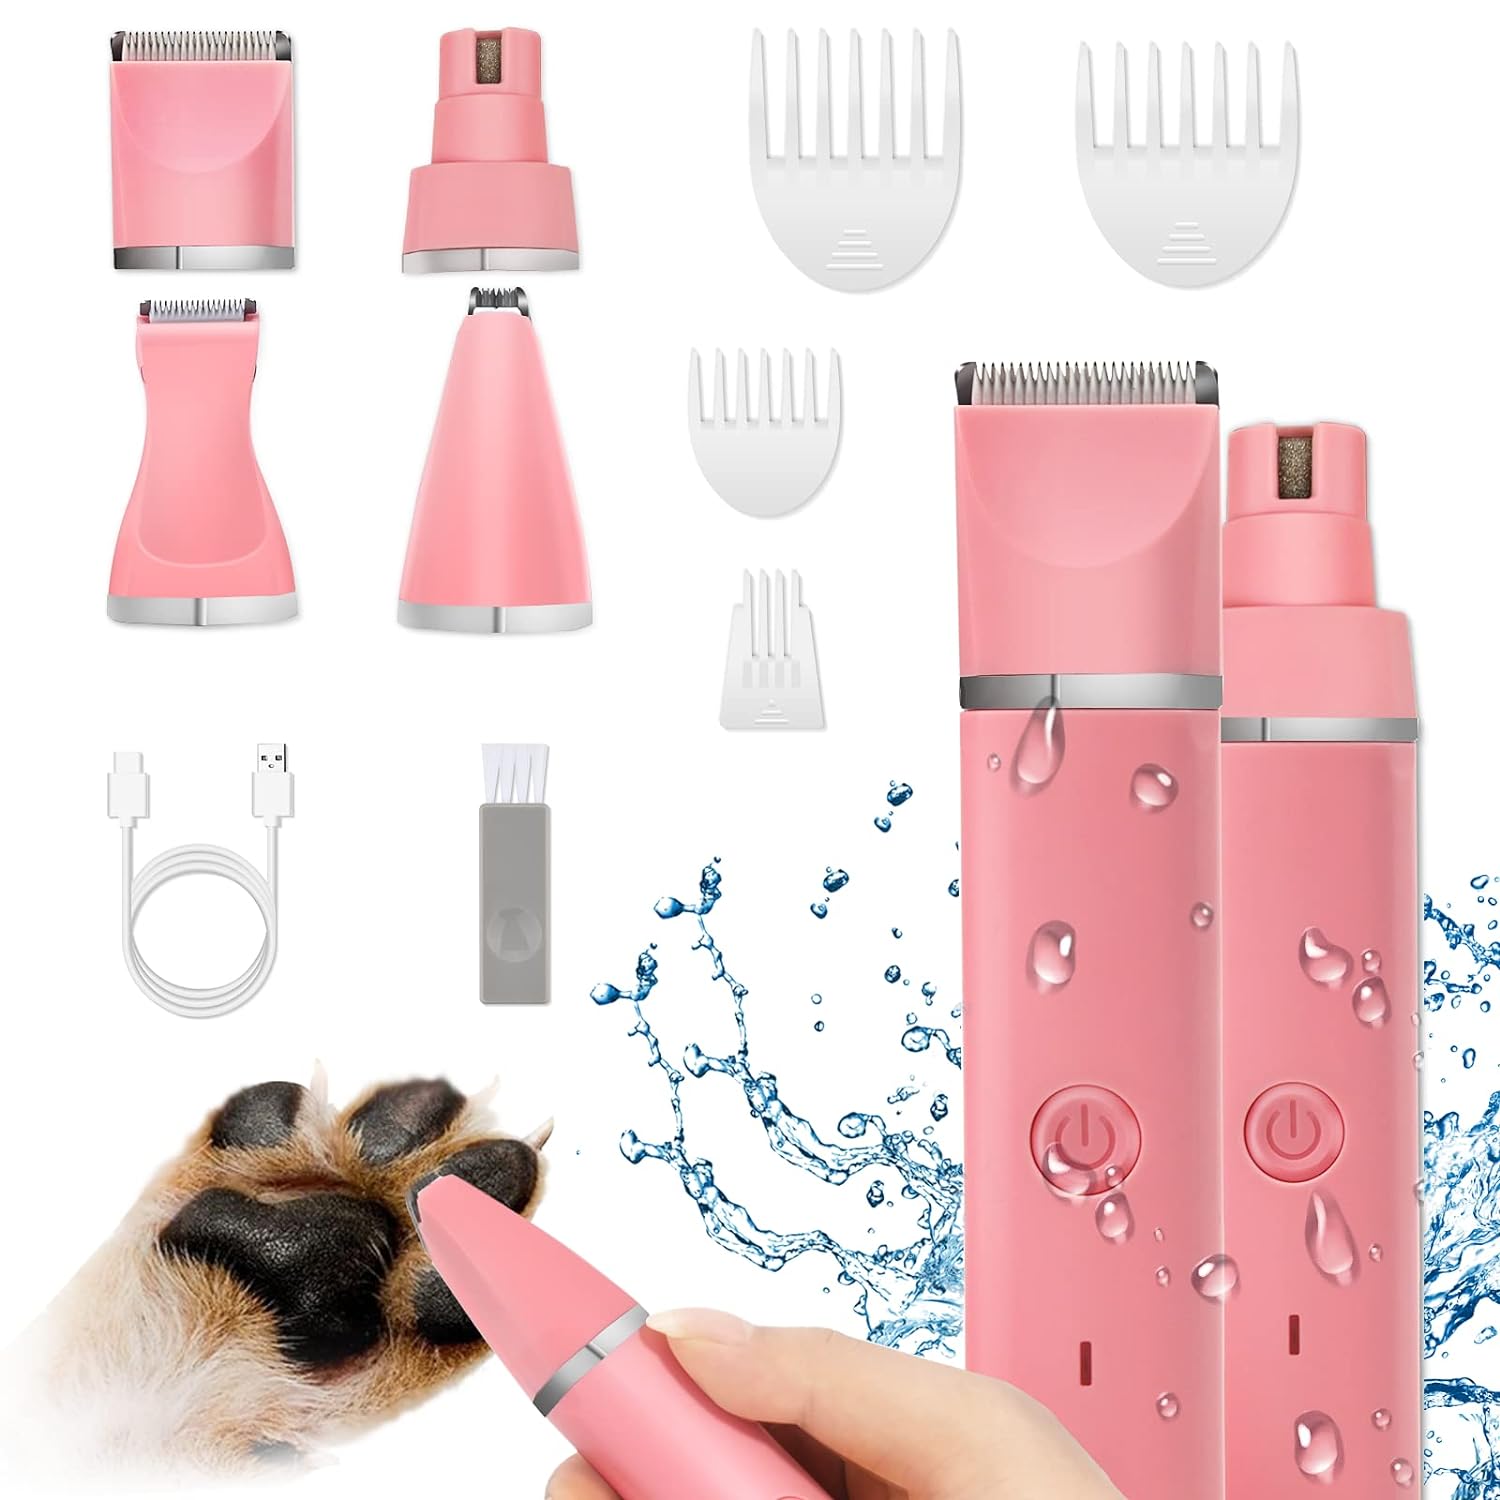 Dog Grooming Clippers Kit Review